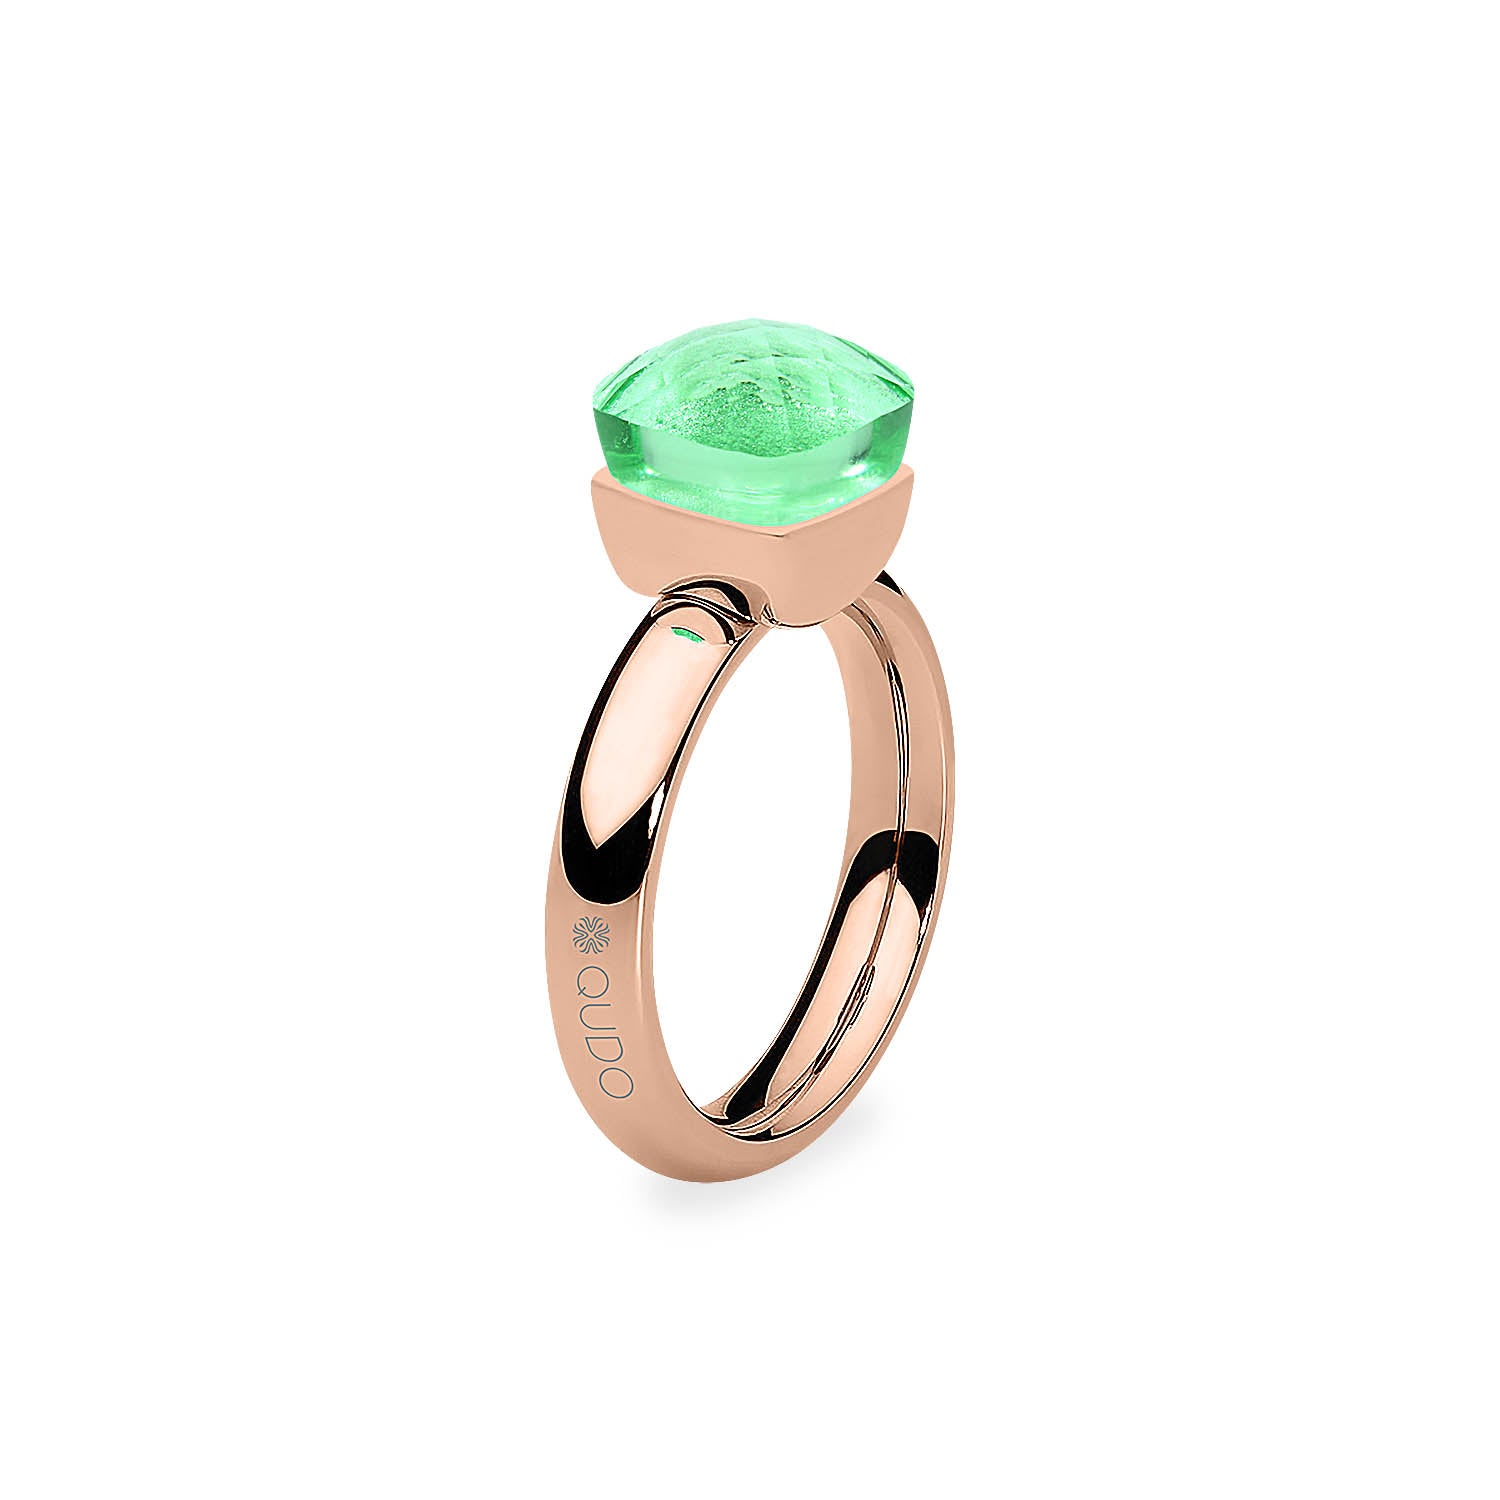 Firenze Ring - Shades of Green & Brown - Rose Gold